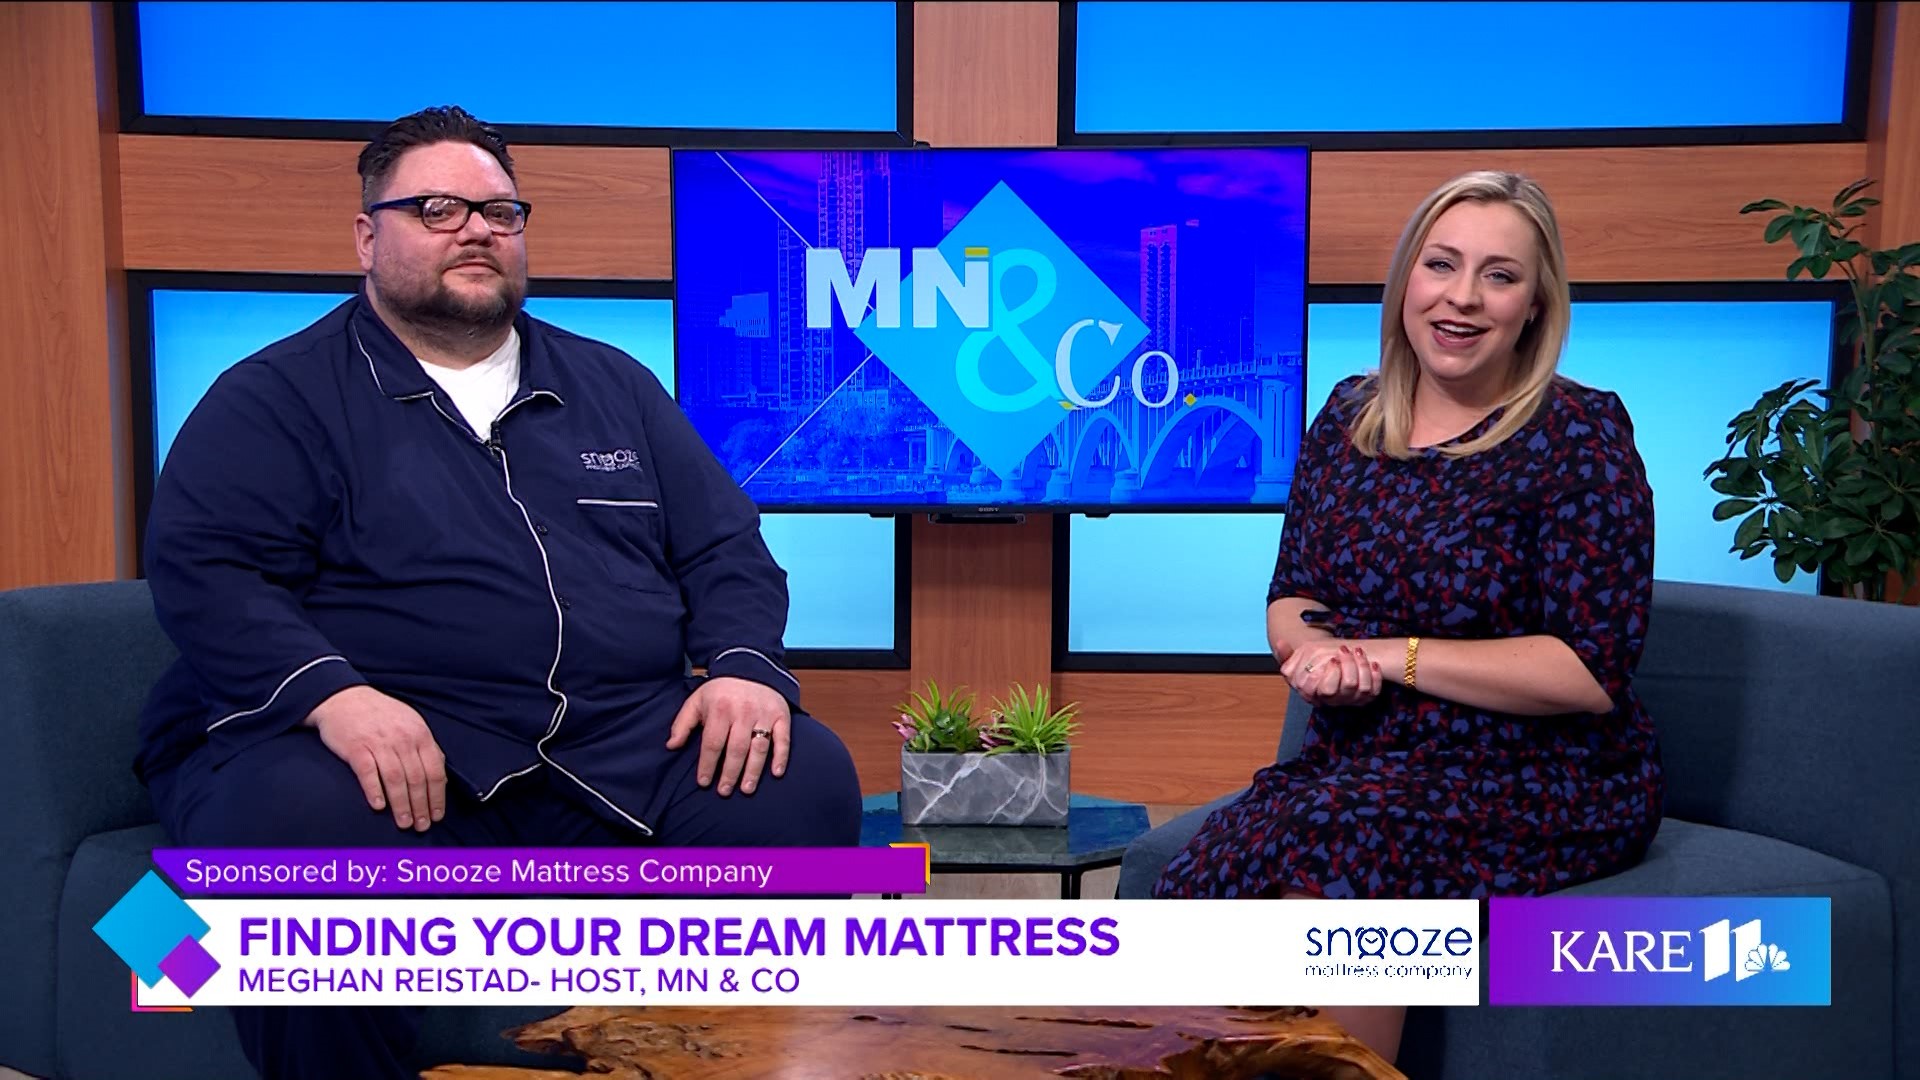 Snooze Mattress Company joins Minnesota and Company to discuss their innovative Dream Mapping technology for personalized mattress fitting for the perfect match.